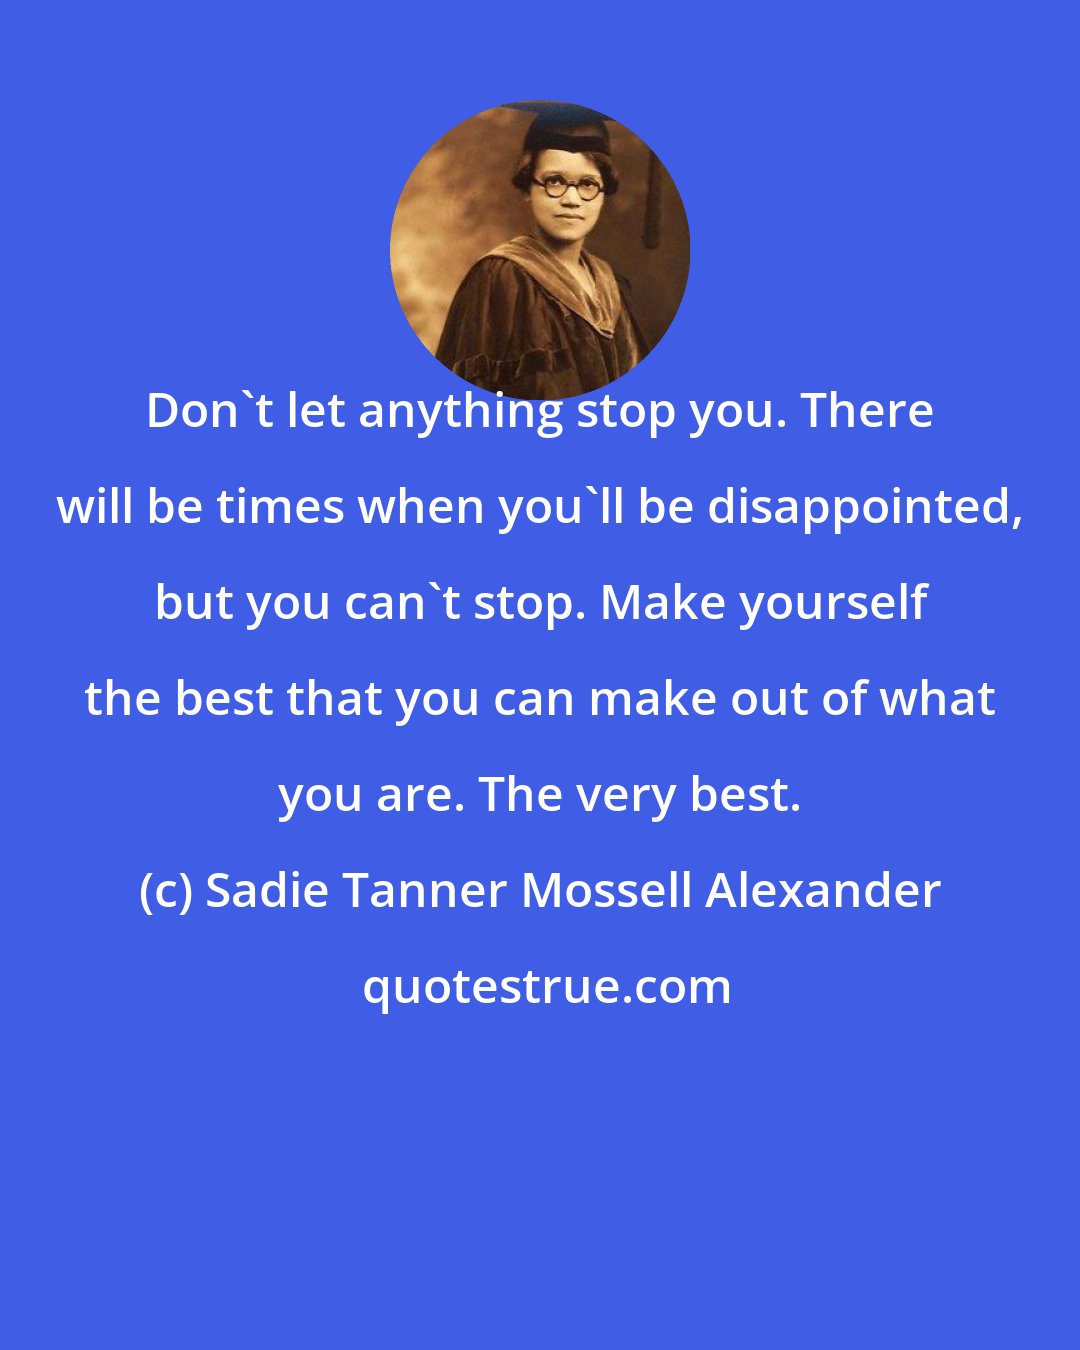 Sadie Tanner Mossell Alexander: Don't let anything stop you. There will be times when you'll be disappointed, but you can't stop. Make yourself the best that you can make out of what you are. The very best.